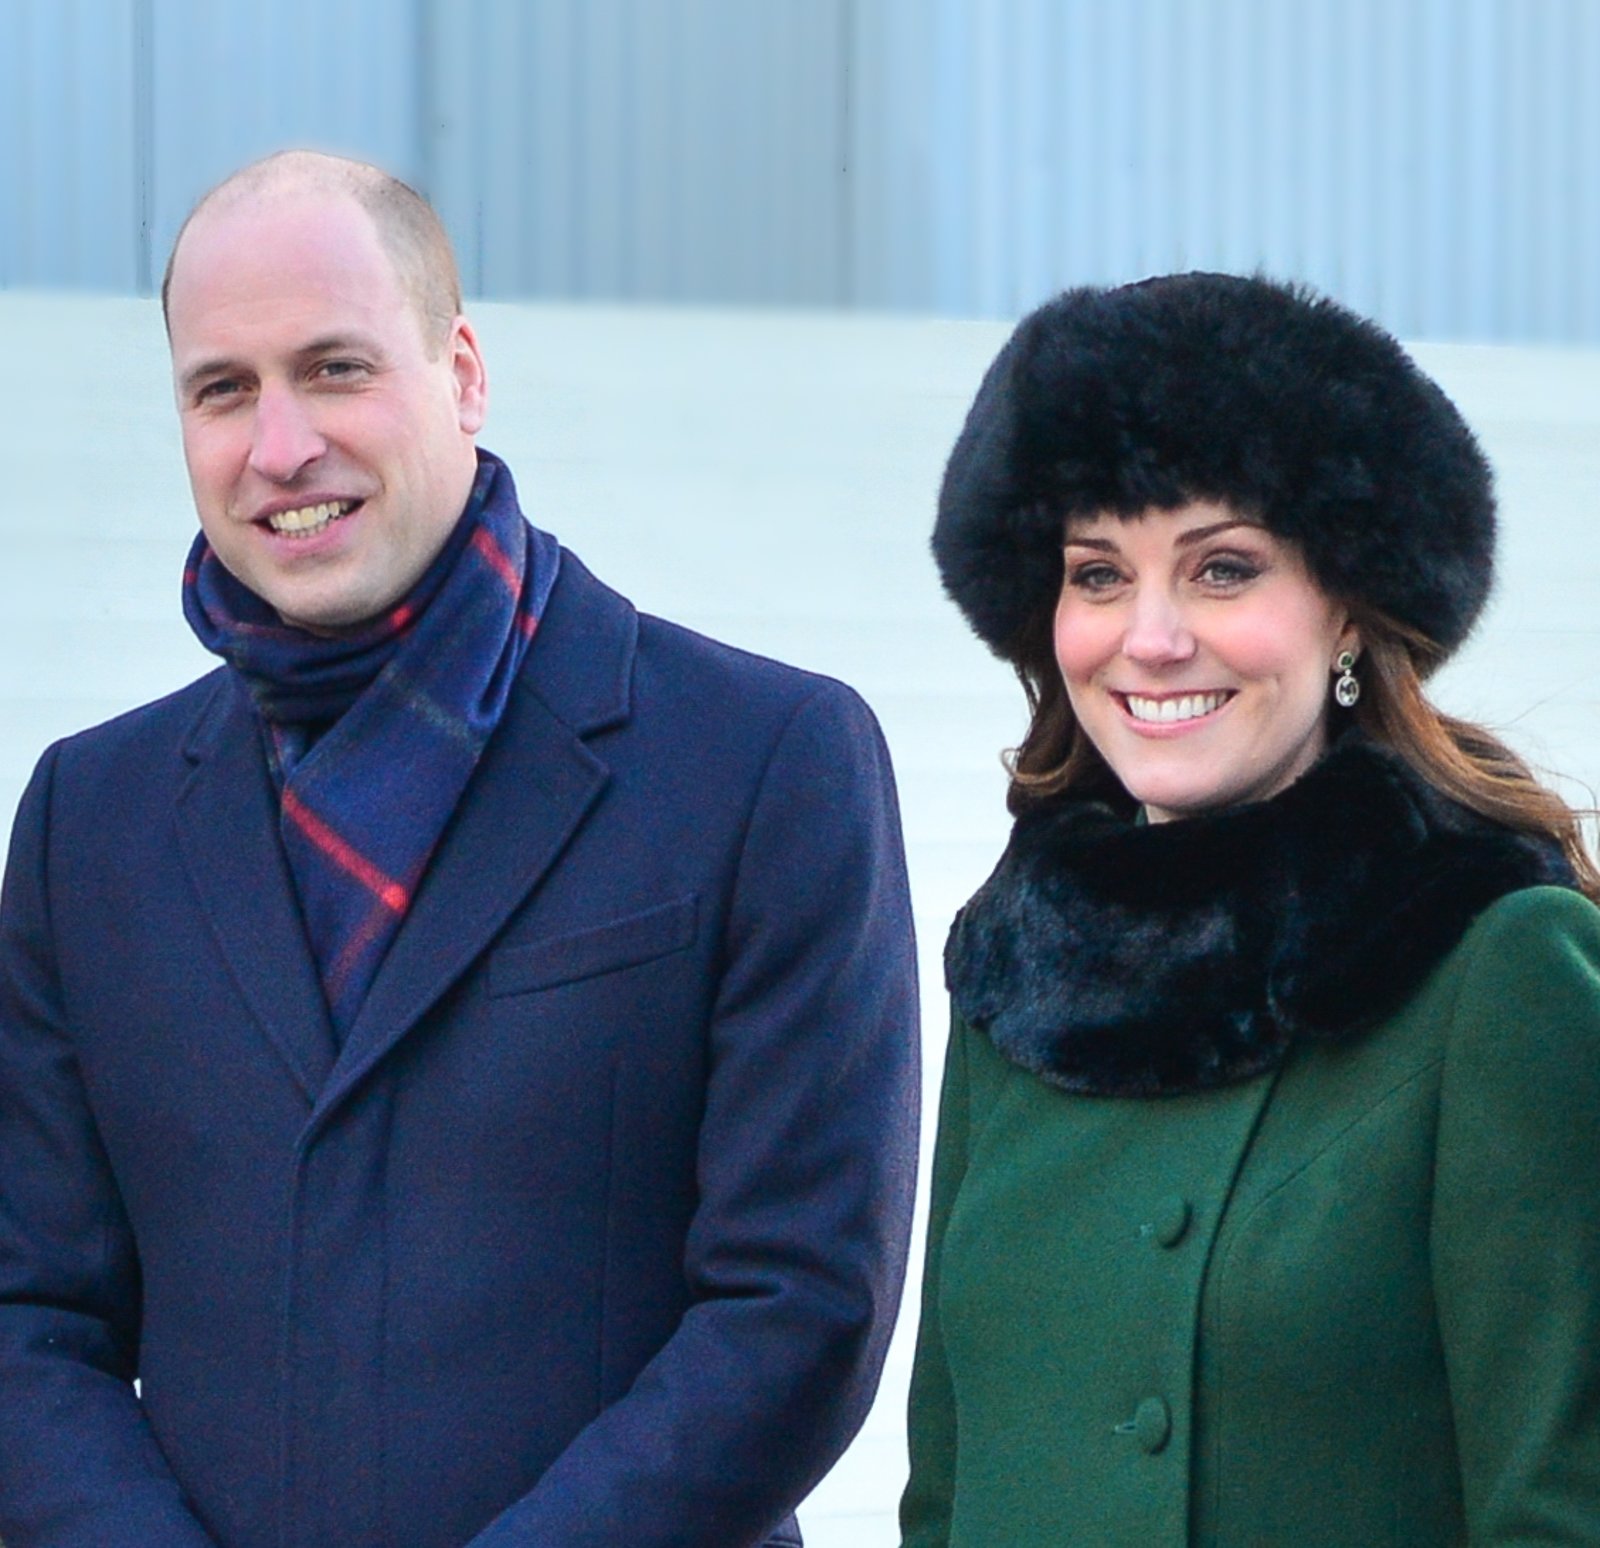 Prince William, Duke of Cambridge and Catherine, Duchess of Cambridge on official visit to Stockholm in Sweden in January 2018 | Source: Frankie Fouganthin / Wikimedia Commons